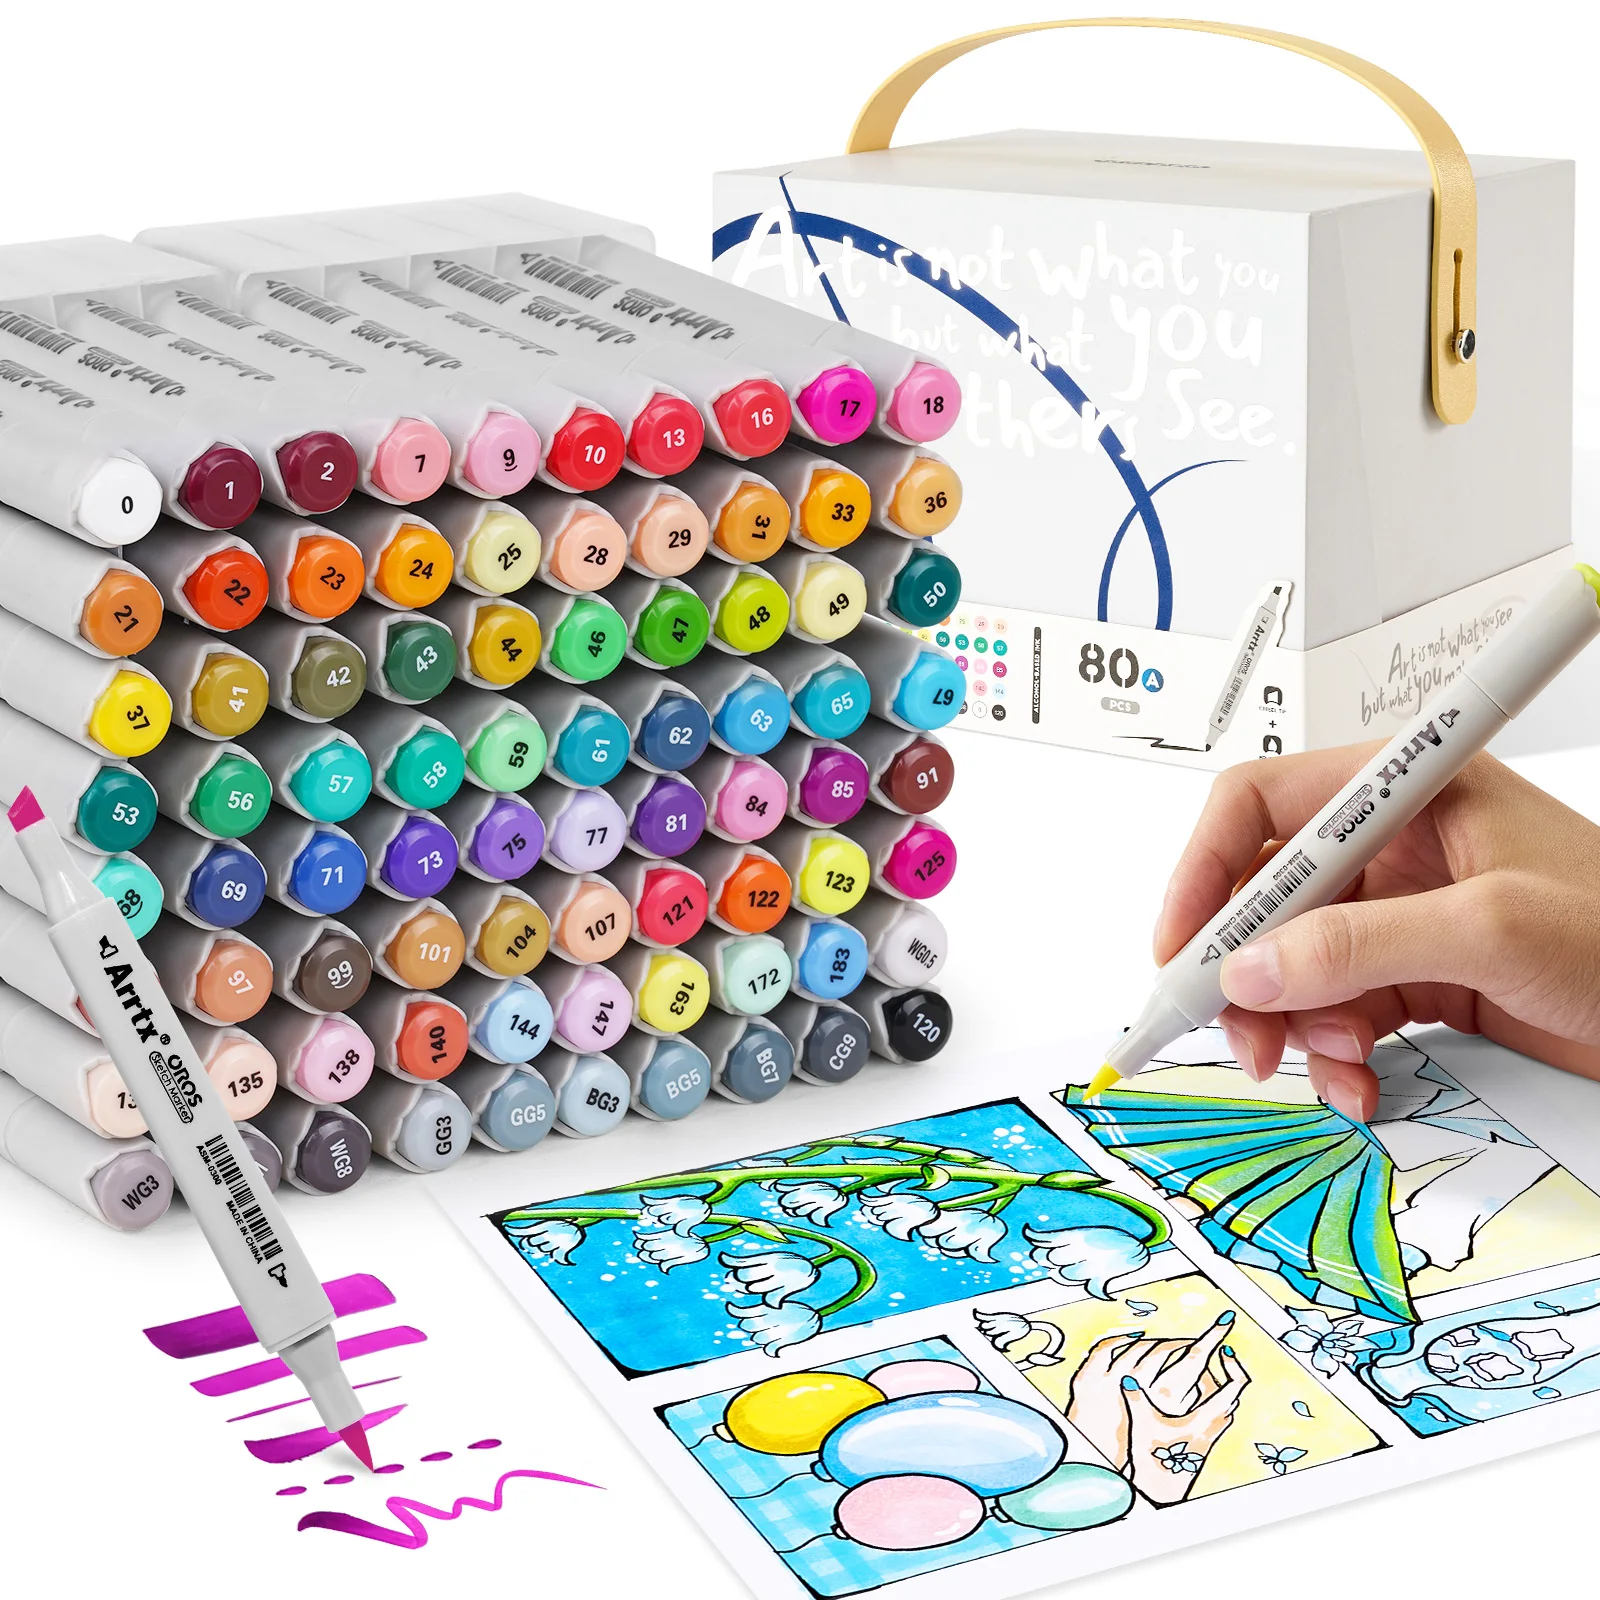 https://ae01.alicdn.com/kf/S96de180cb7e4401fafeef9ce30be70c4w/Arrtx-Oros-80-90-Colors-of-Alcohol-Brush-Marker-Dual-Tips-Marker-Pen-for-Drawing-Sketching.jpg